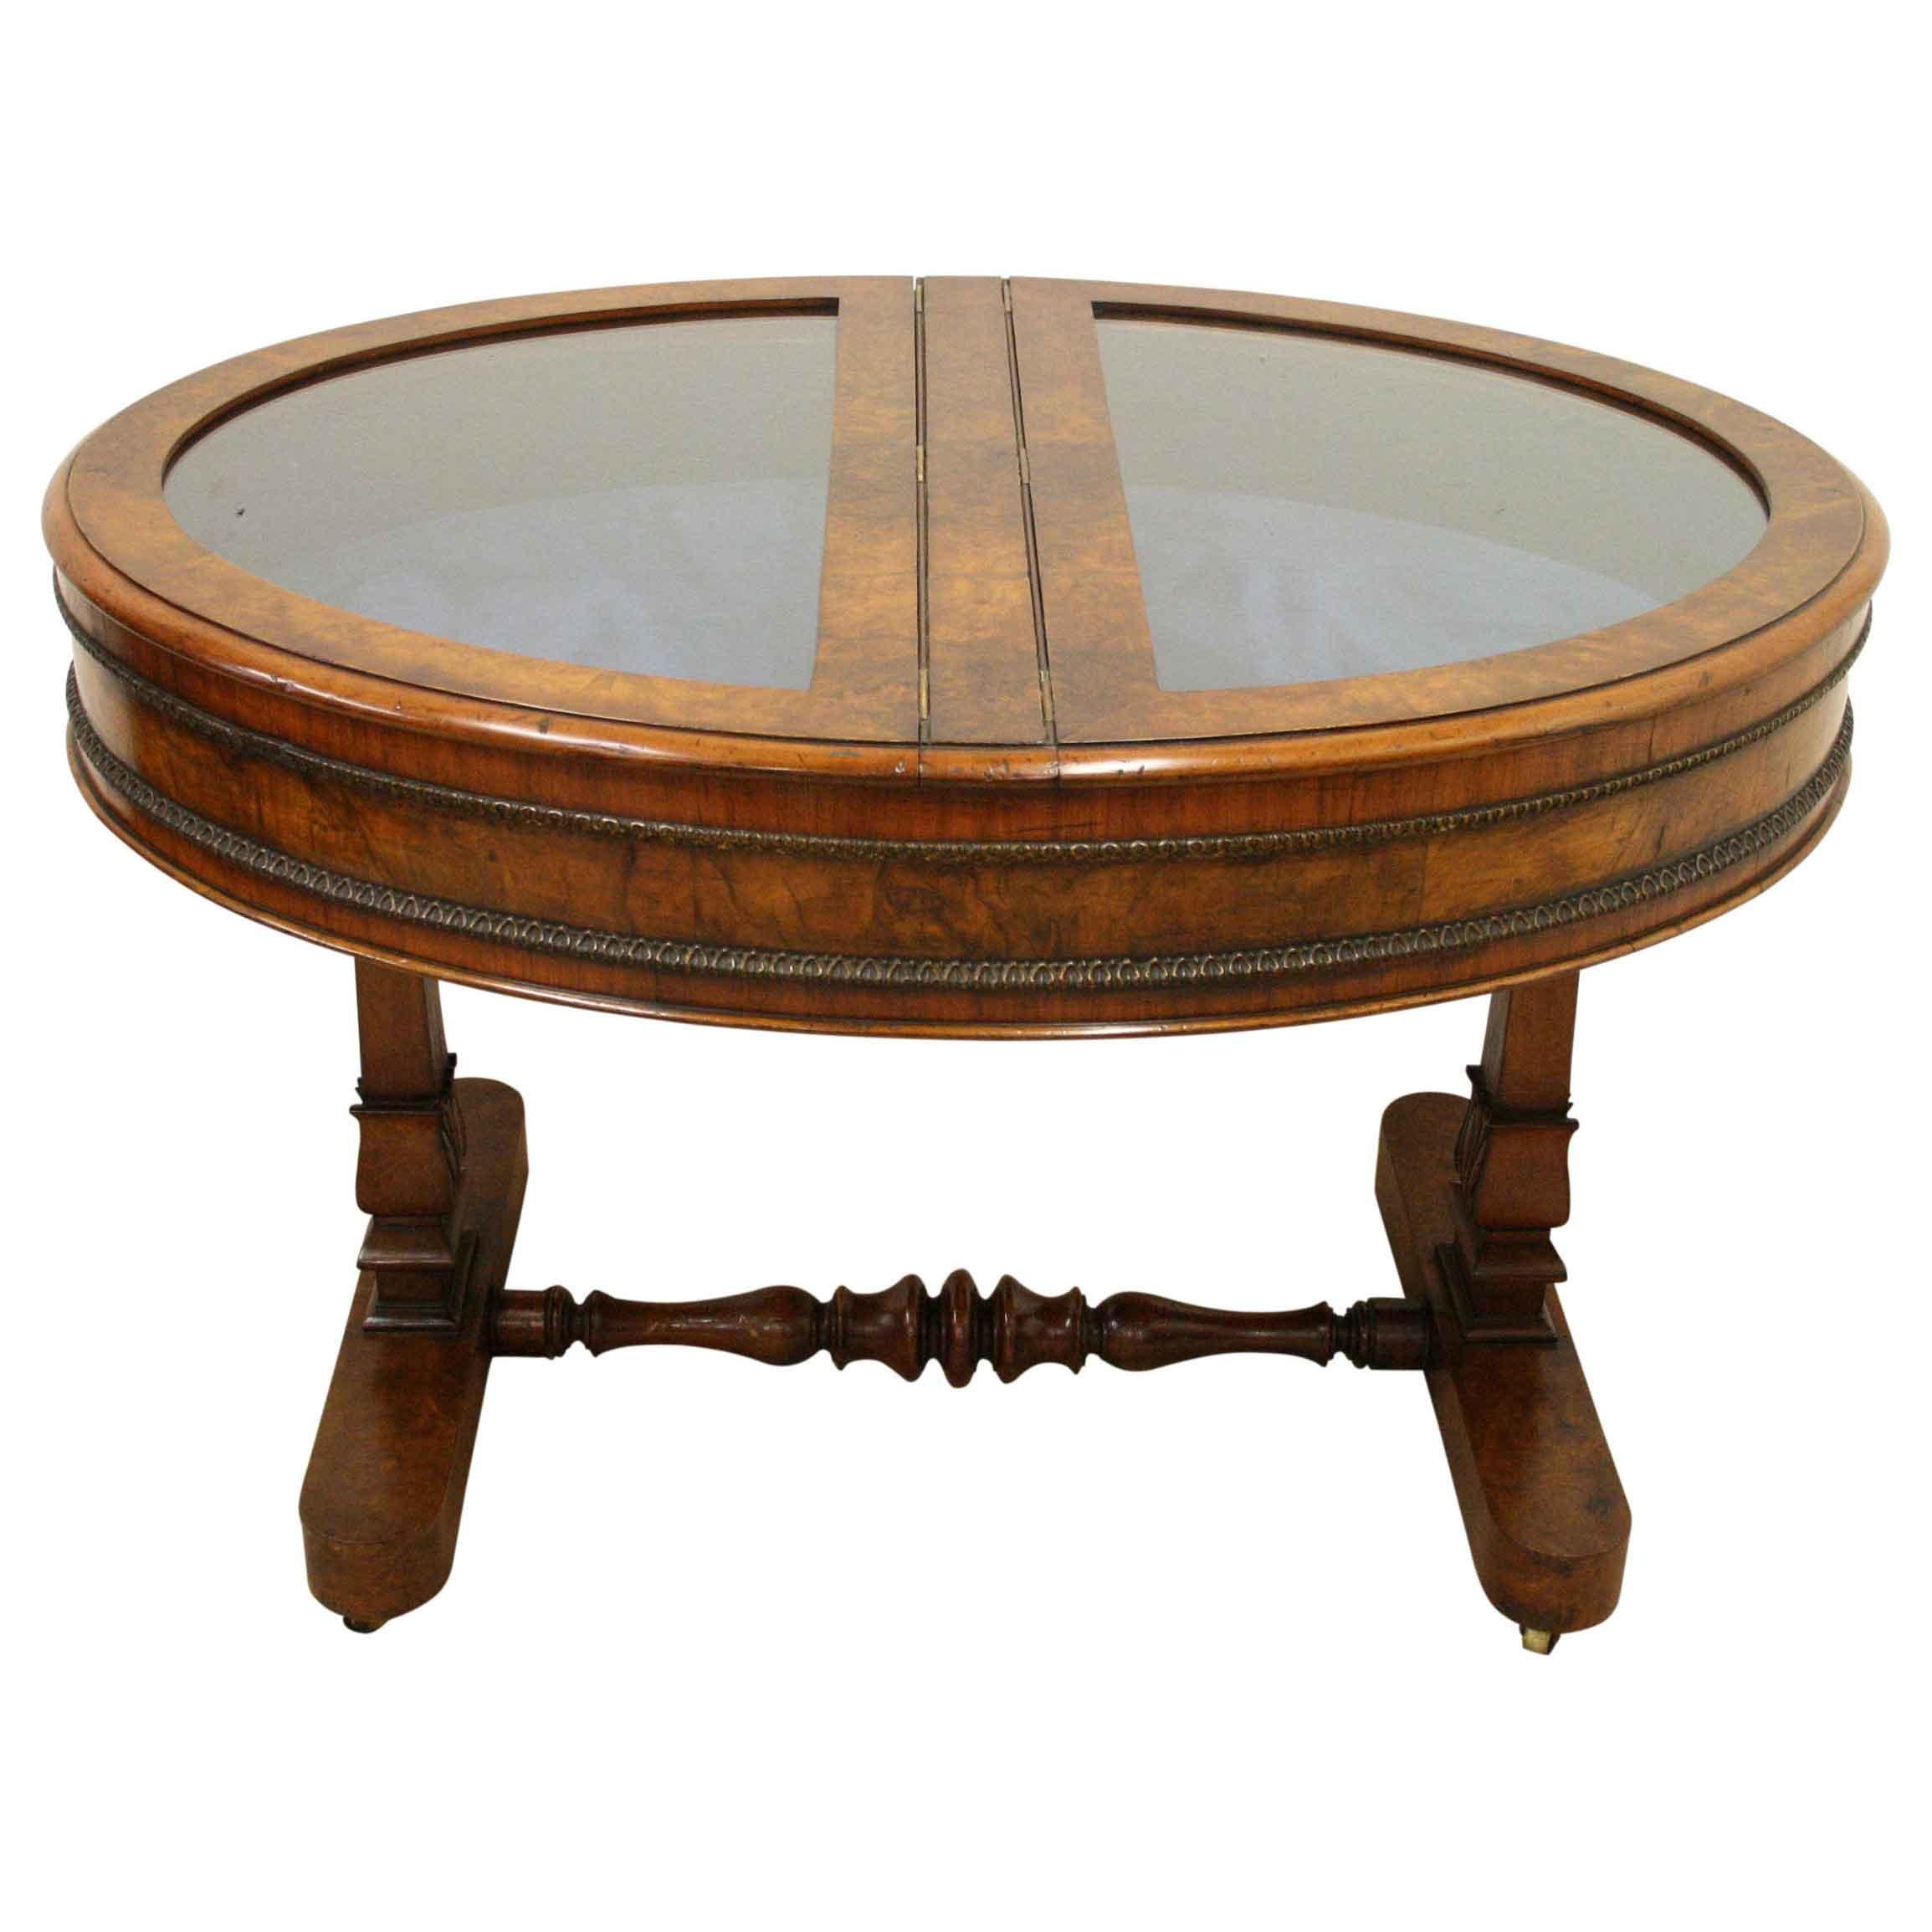 Late George IV/early William IV burr walnut display table/bijouterie table, circa 1830. The oval top is divided into two D shaped glazed doors, which open and are held in place with a brass locking arm. The inside is lined in felt and the frames are